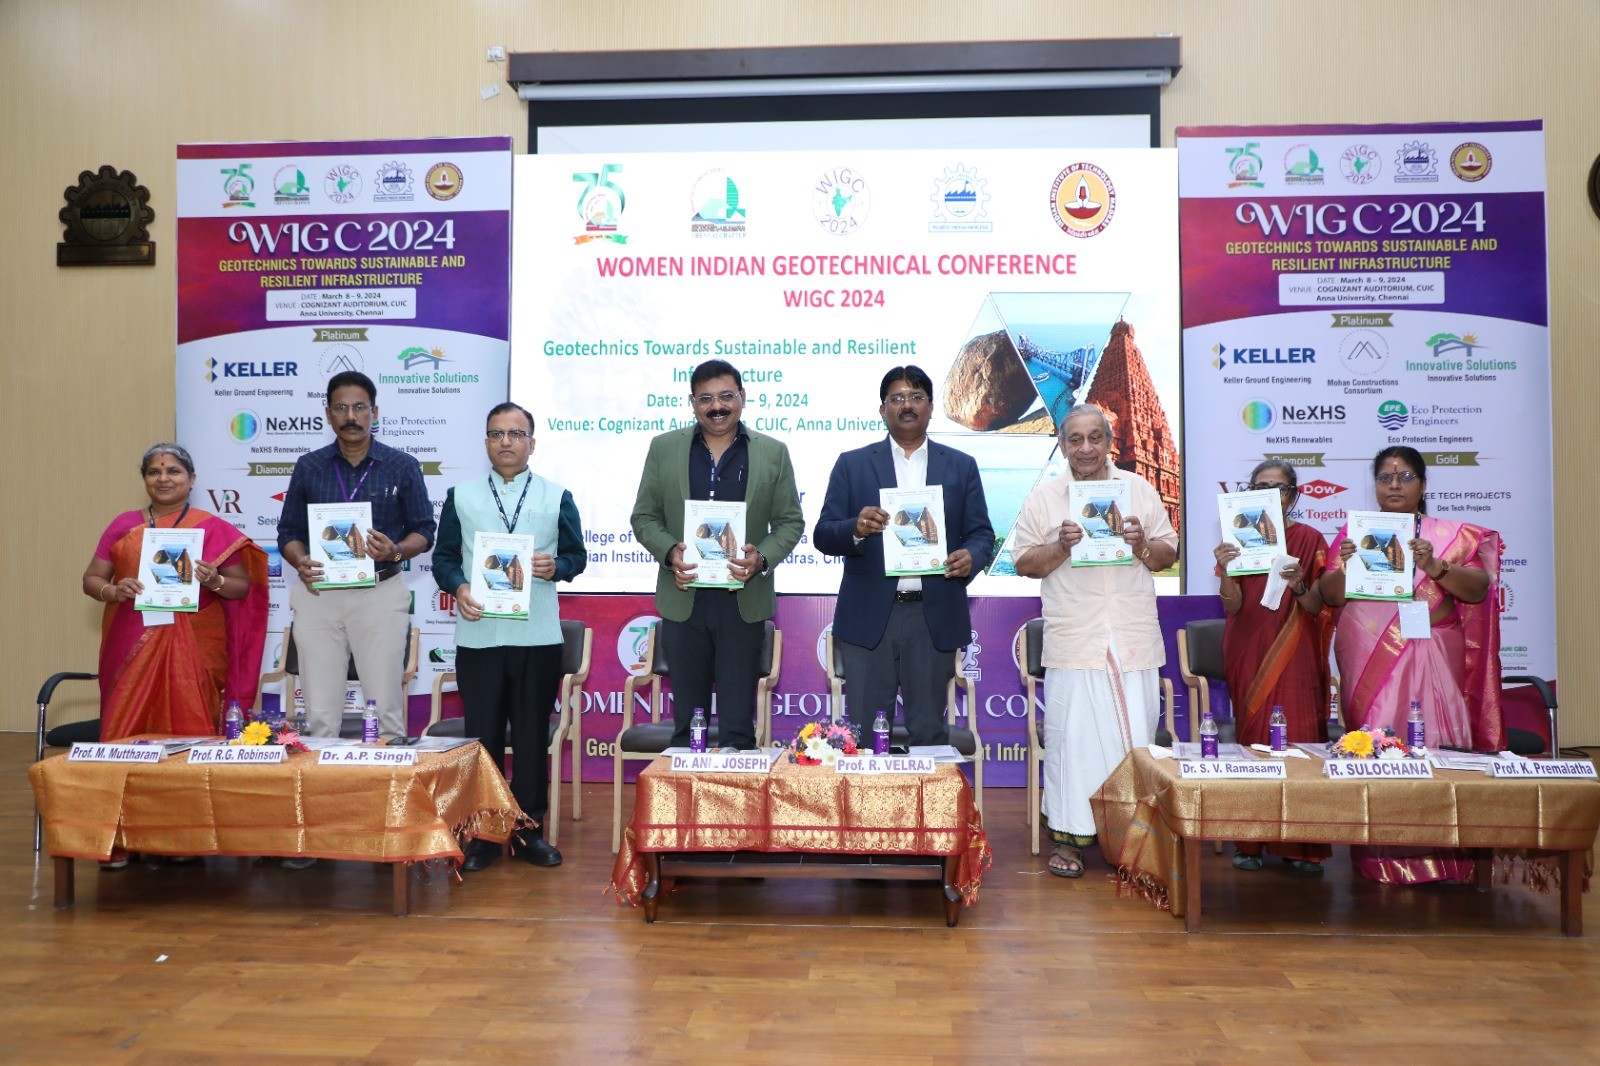 “Women Indian Geotechnical Conference-Geotechnics Towards Sustainable and Resilient Infrastructure WIGC- GEOSU?R?”